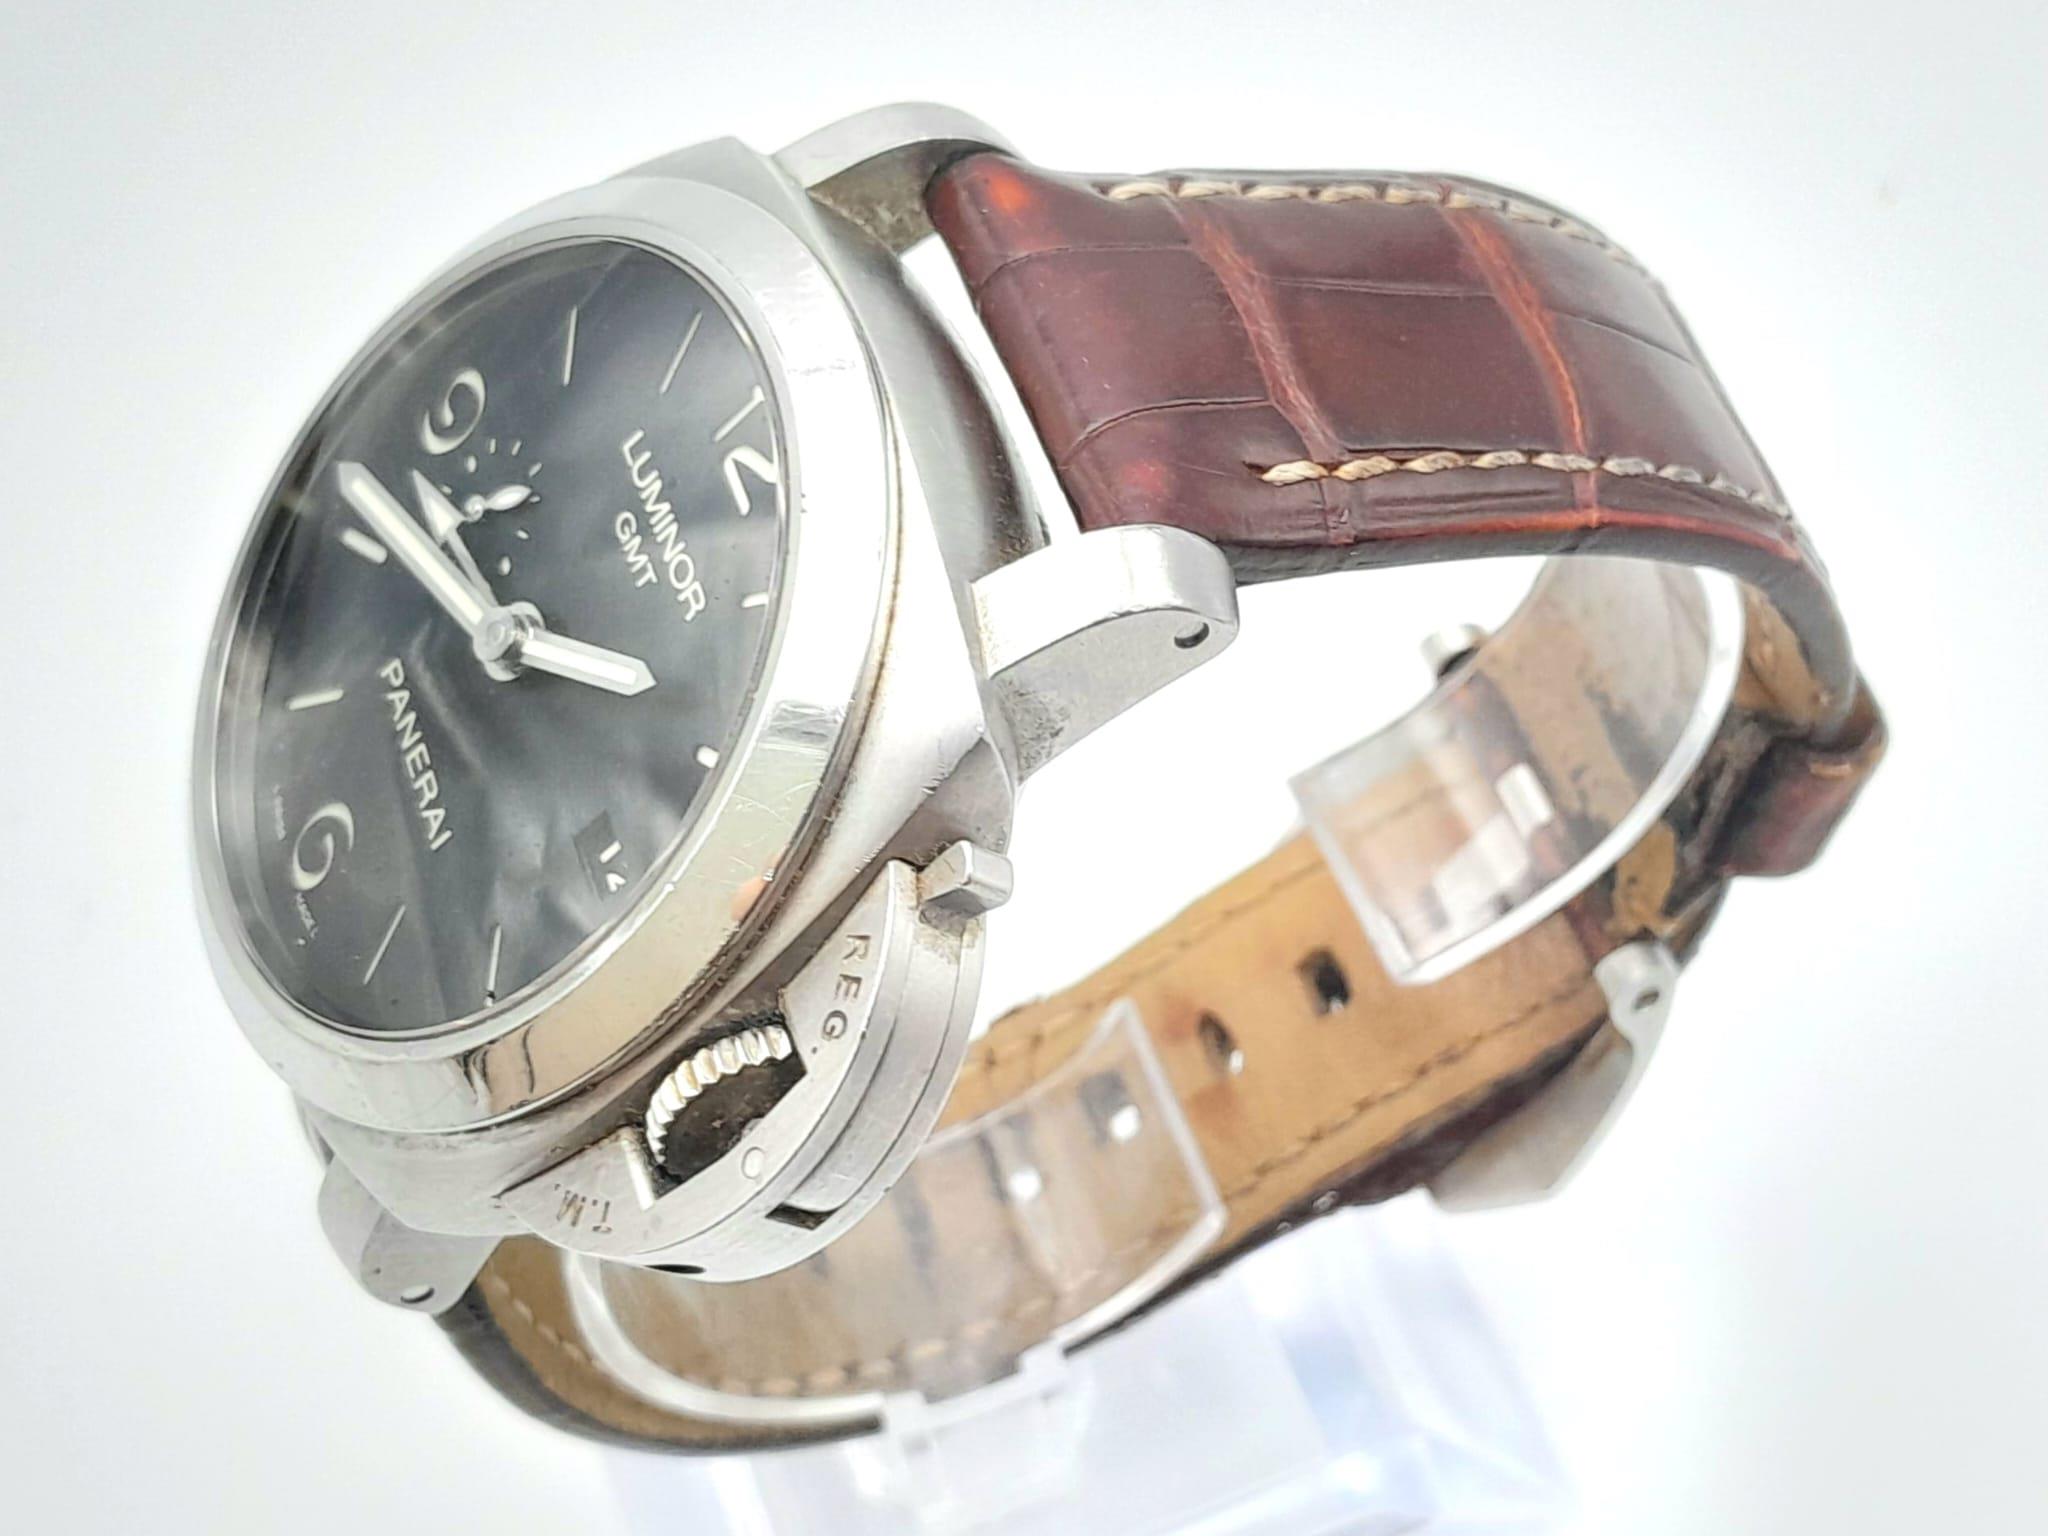 A "PANERAI LUMINOR GMT" WITH SKELETON BACK IN STAINLESS STEEL, A VERY SOUGHT AFTER PRESTIGE WATCH! - Image 3 of 11